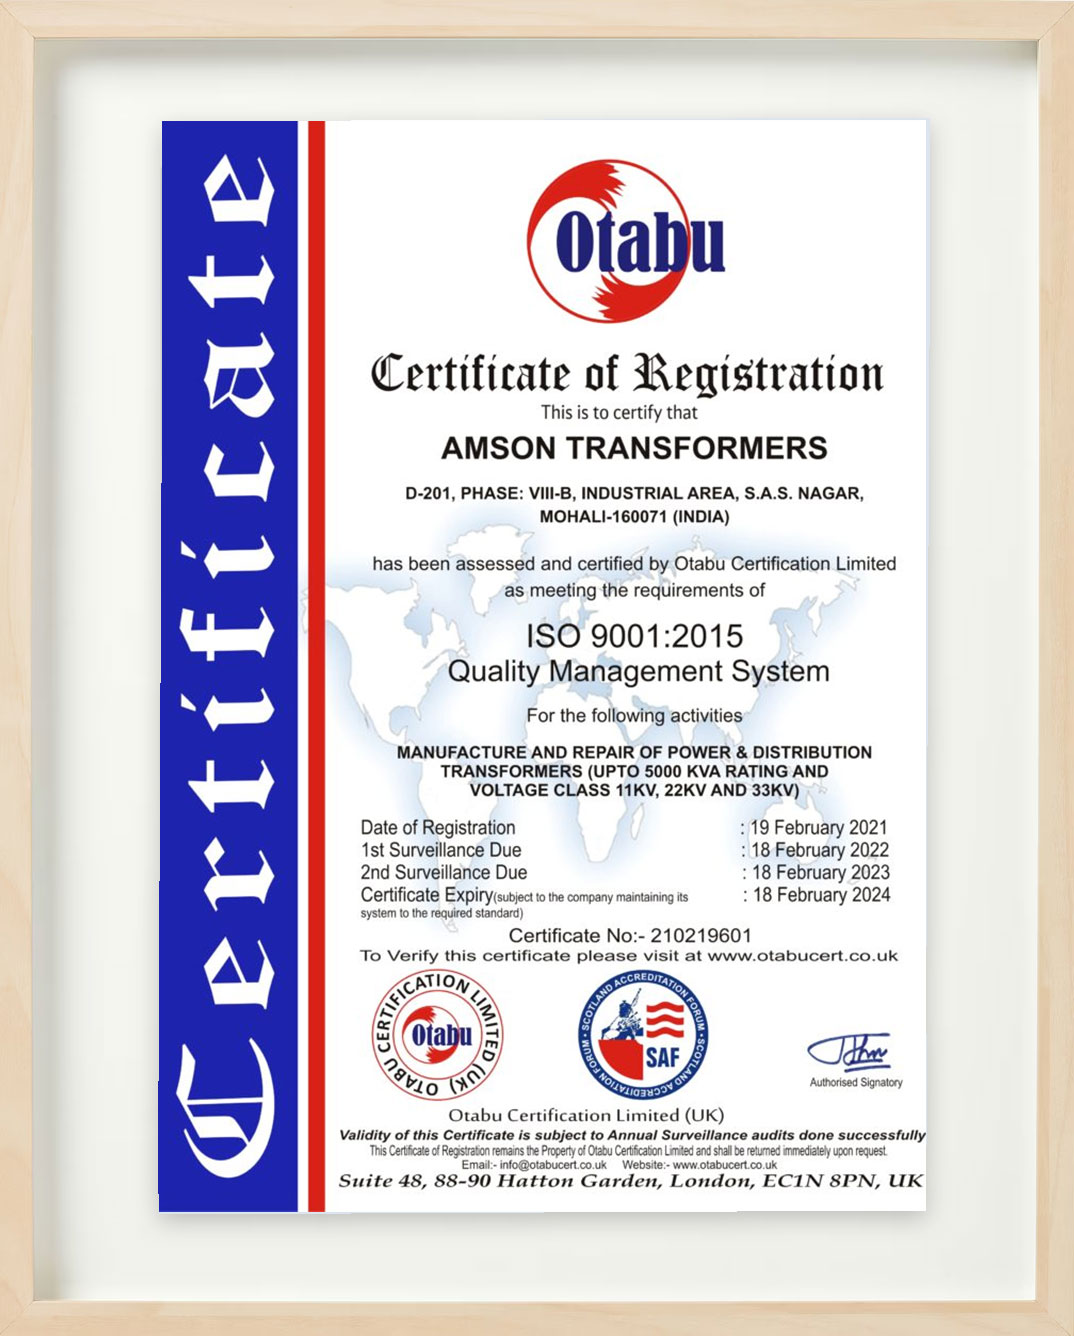 Our Certification, Amson Transformers